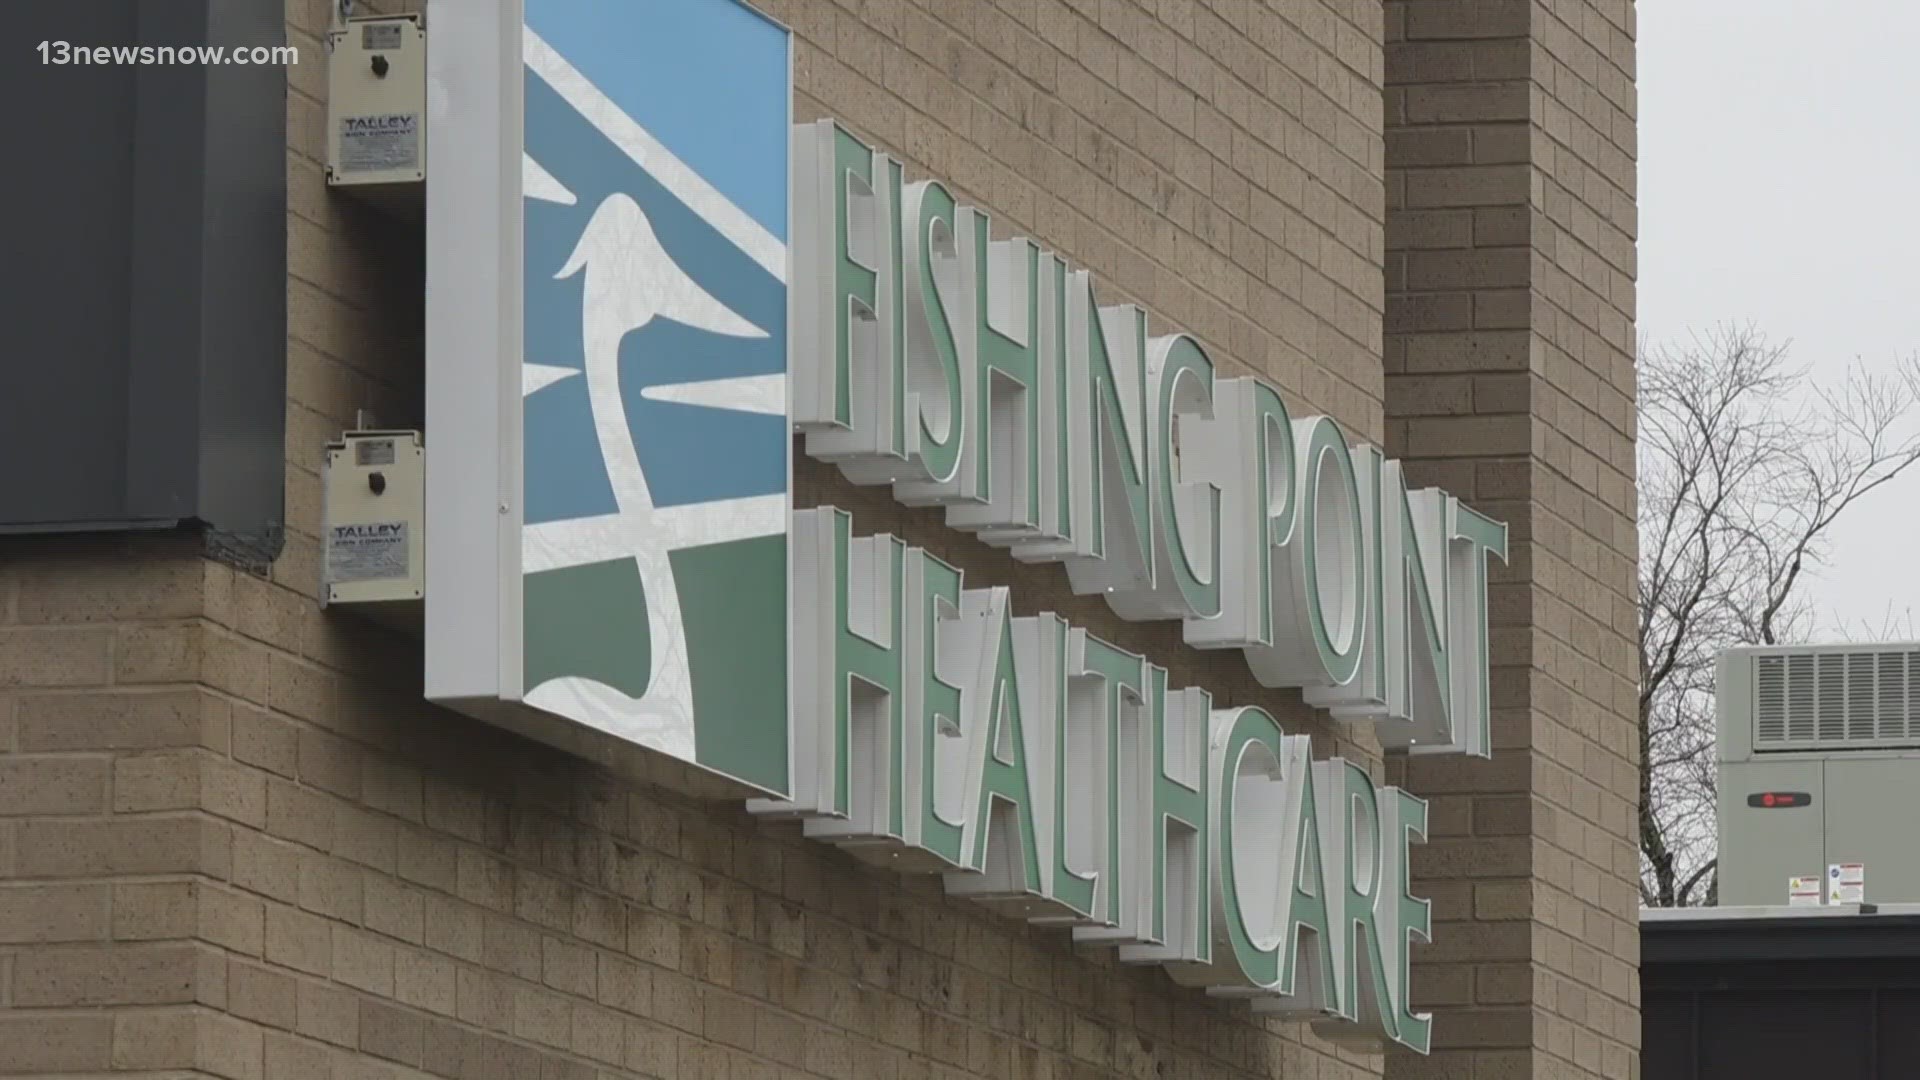 The Nansemond Tribe opened Fishing Point Healthcare on London Boulevard.